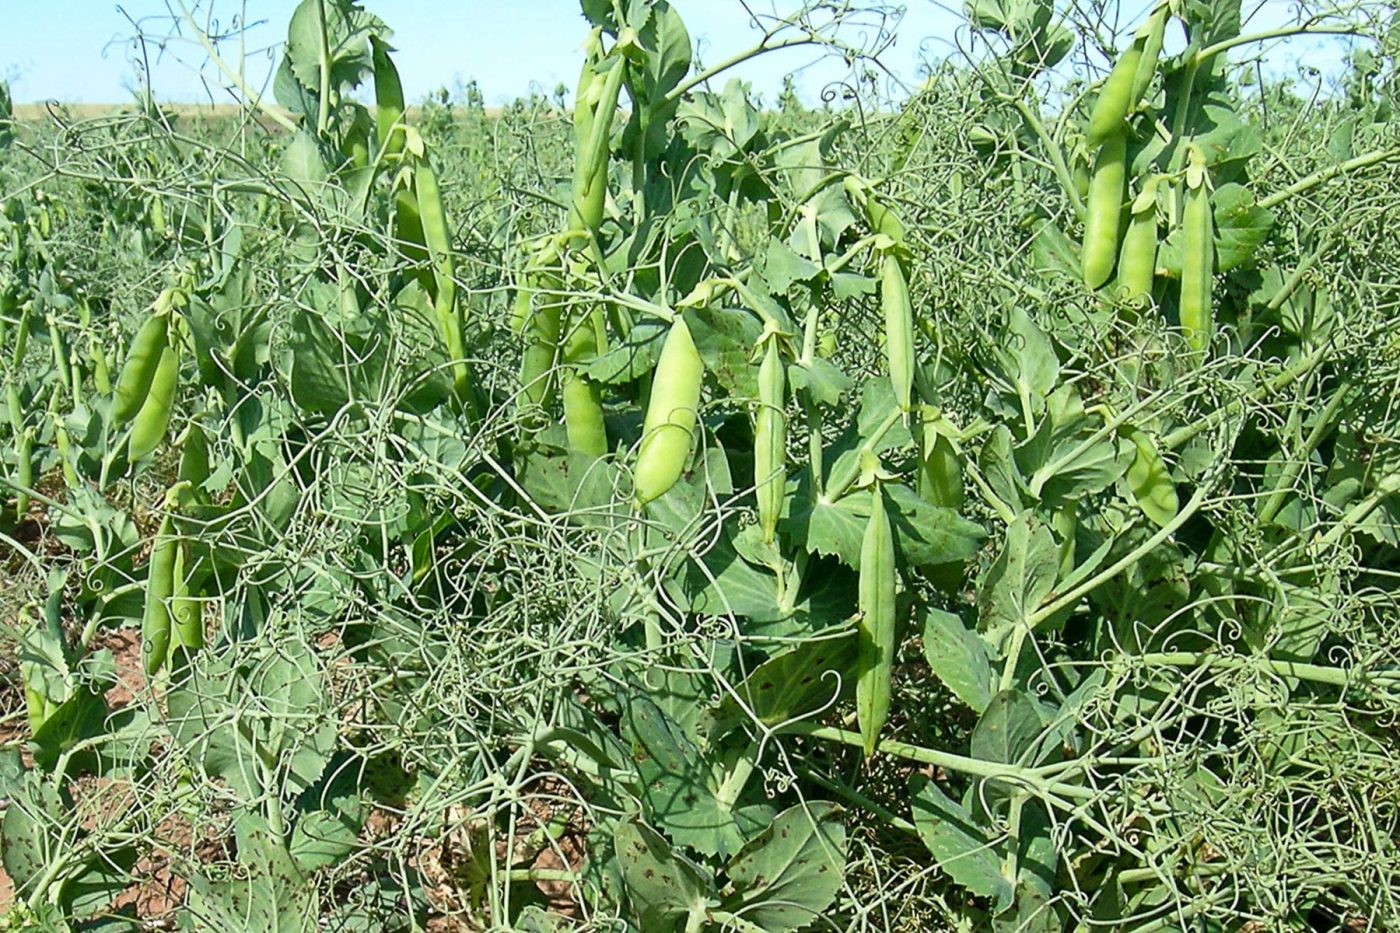 Peas for Producers - Alberta Pulse Growers